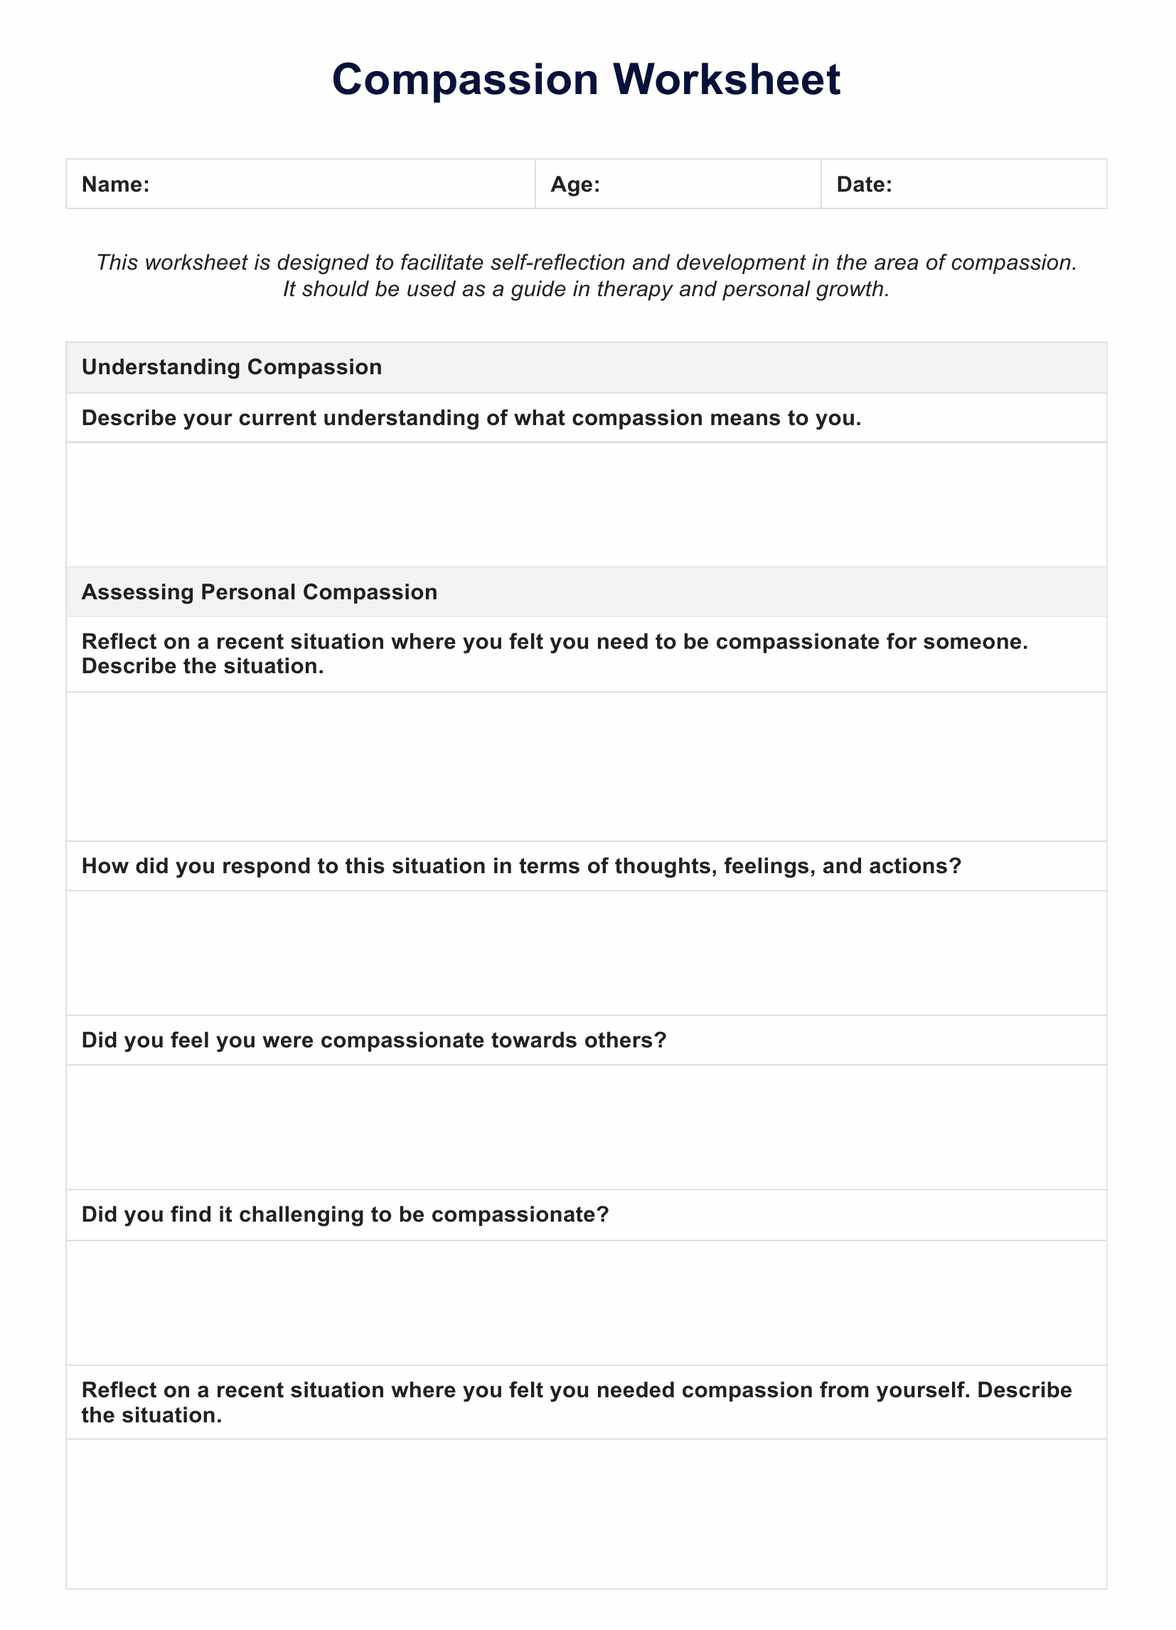 Compassion Worksheet PDF Example